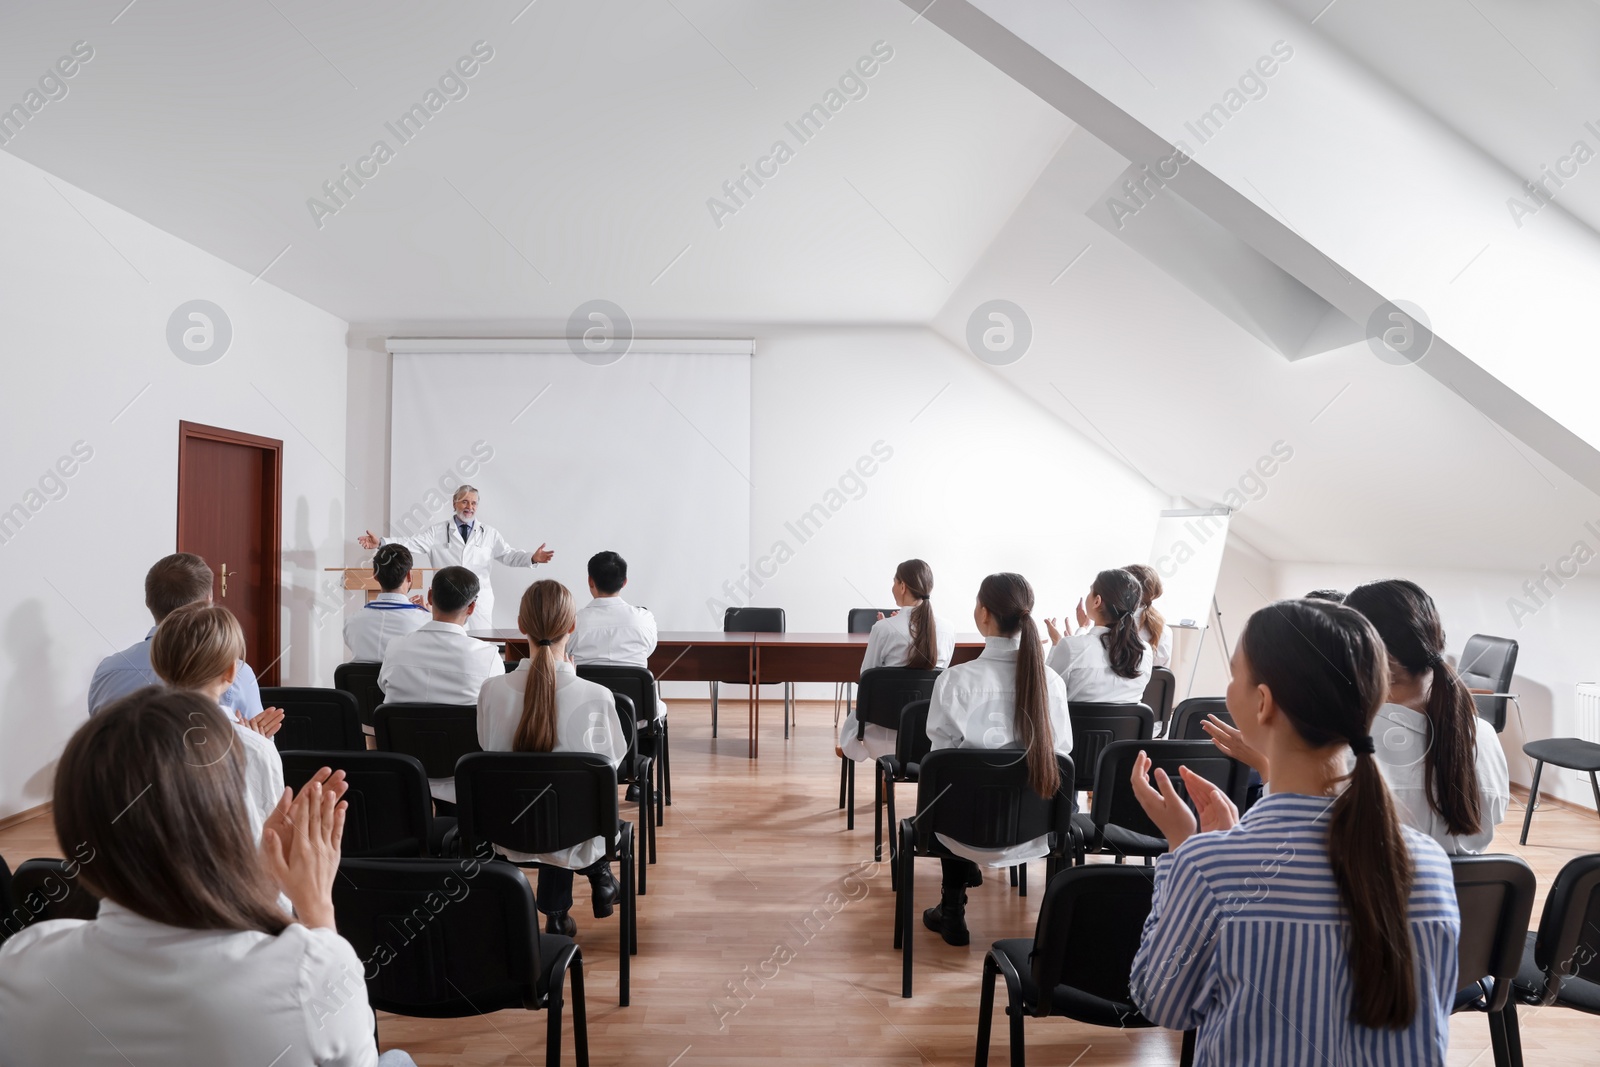 Photo of Senior doctor giving lecture to audience during medical conference in meeting room